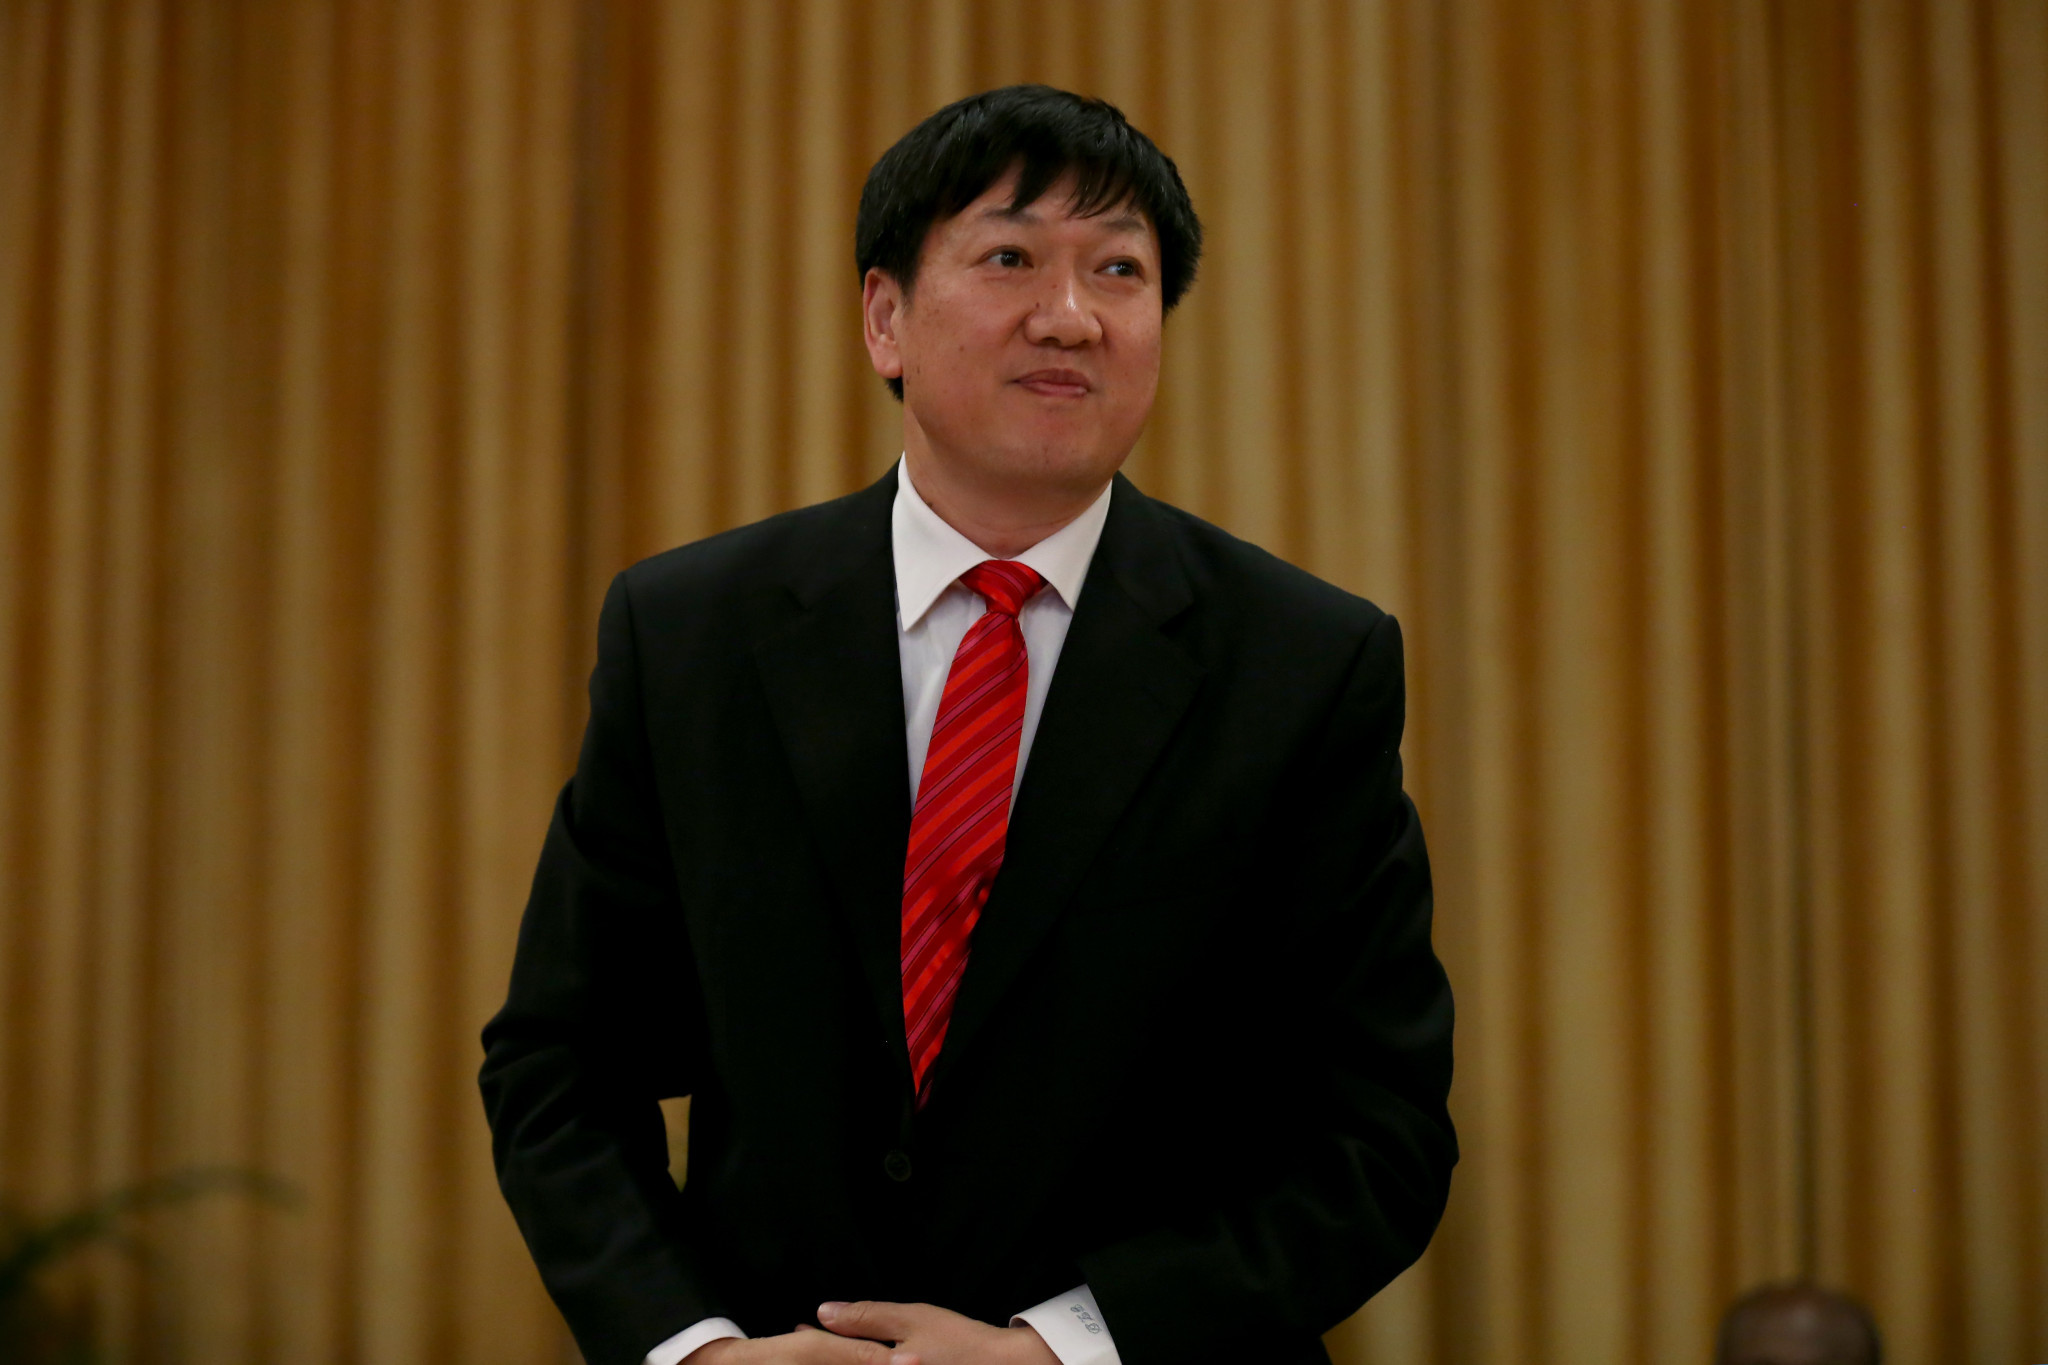 Gao Zhidan has been elected as the new President of the Chinese Olympic Committee following a special plenary session ©Getty Images